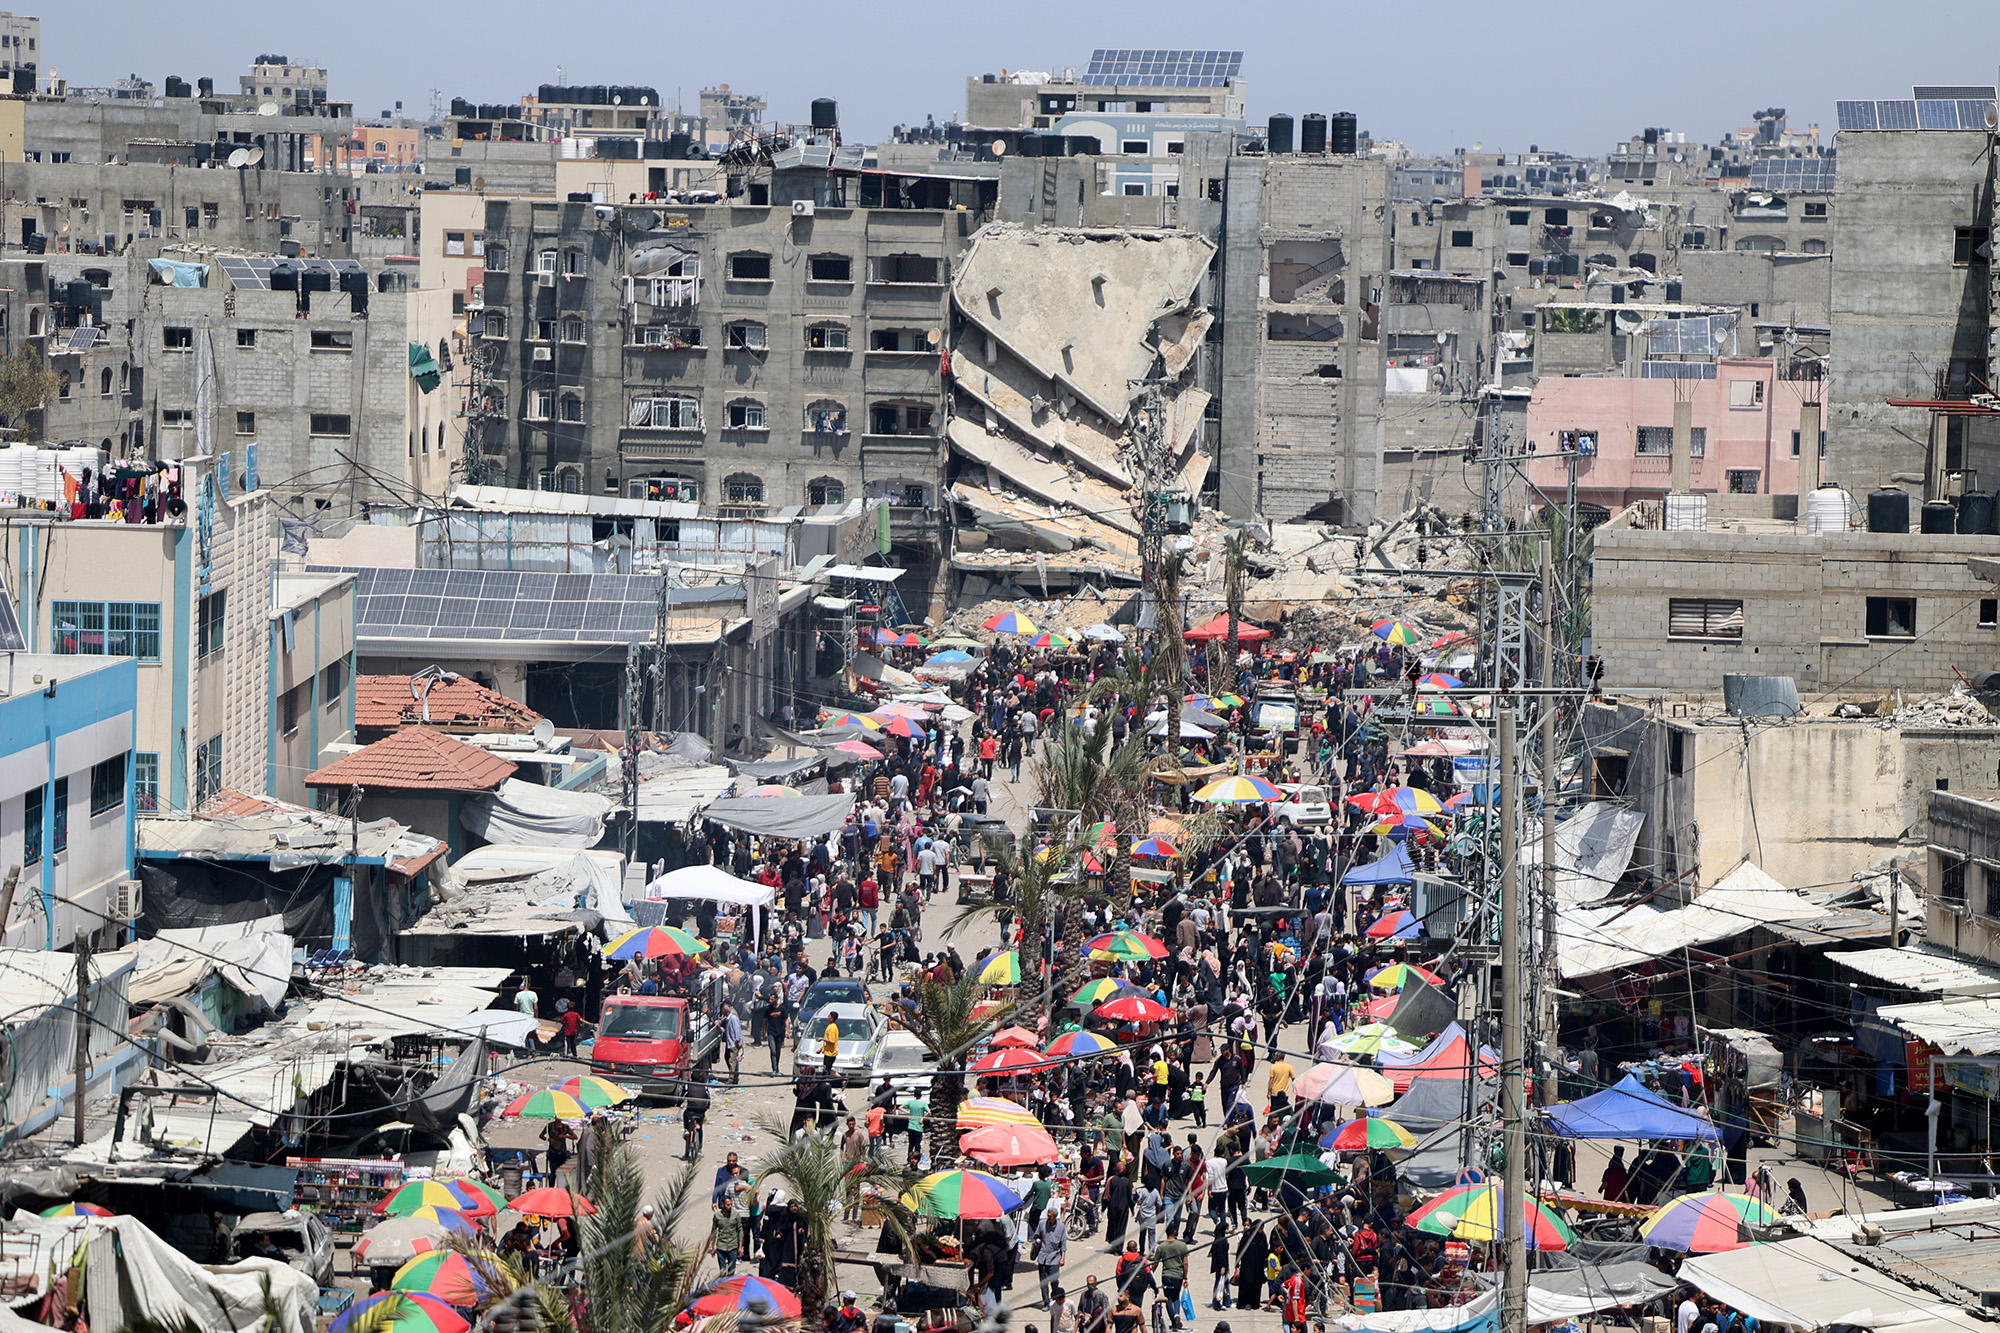 Palestinians do their daily shopping in the market set up between buildings destroyed by Israeli attacks in Beit Lahia, Gaza, on April 20.